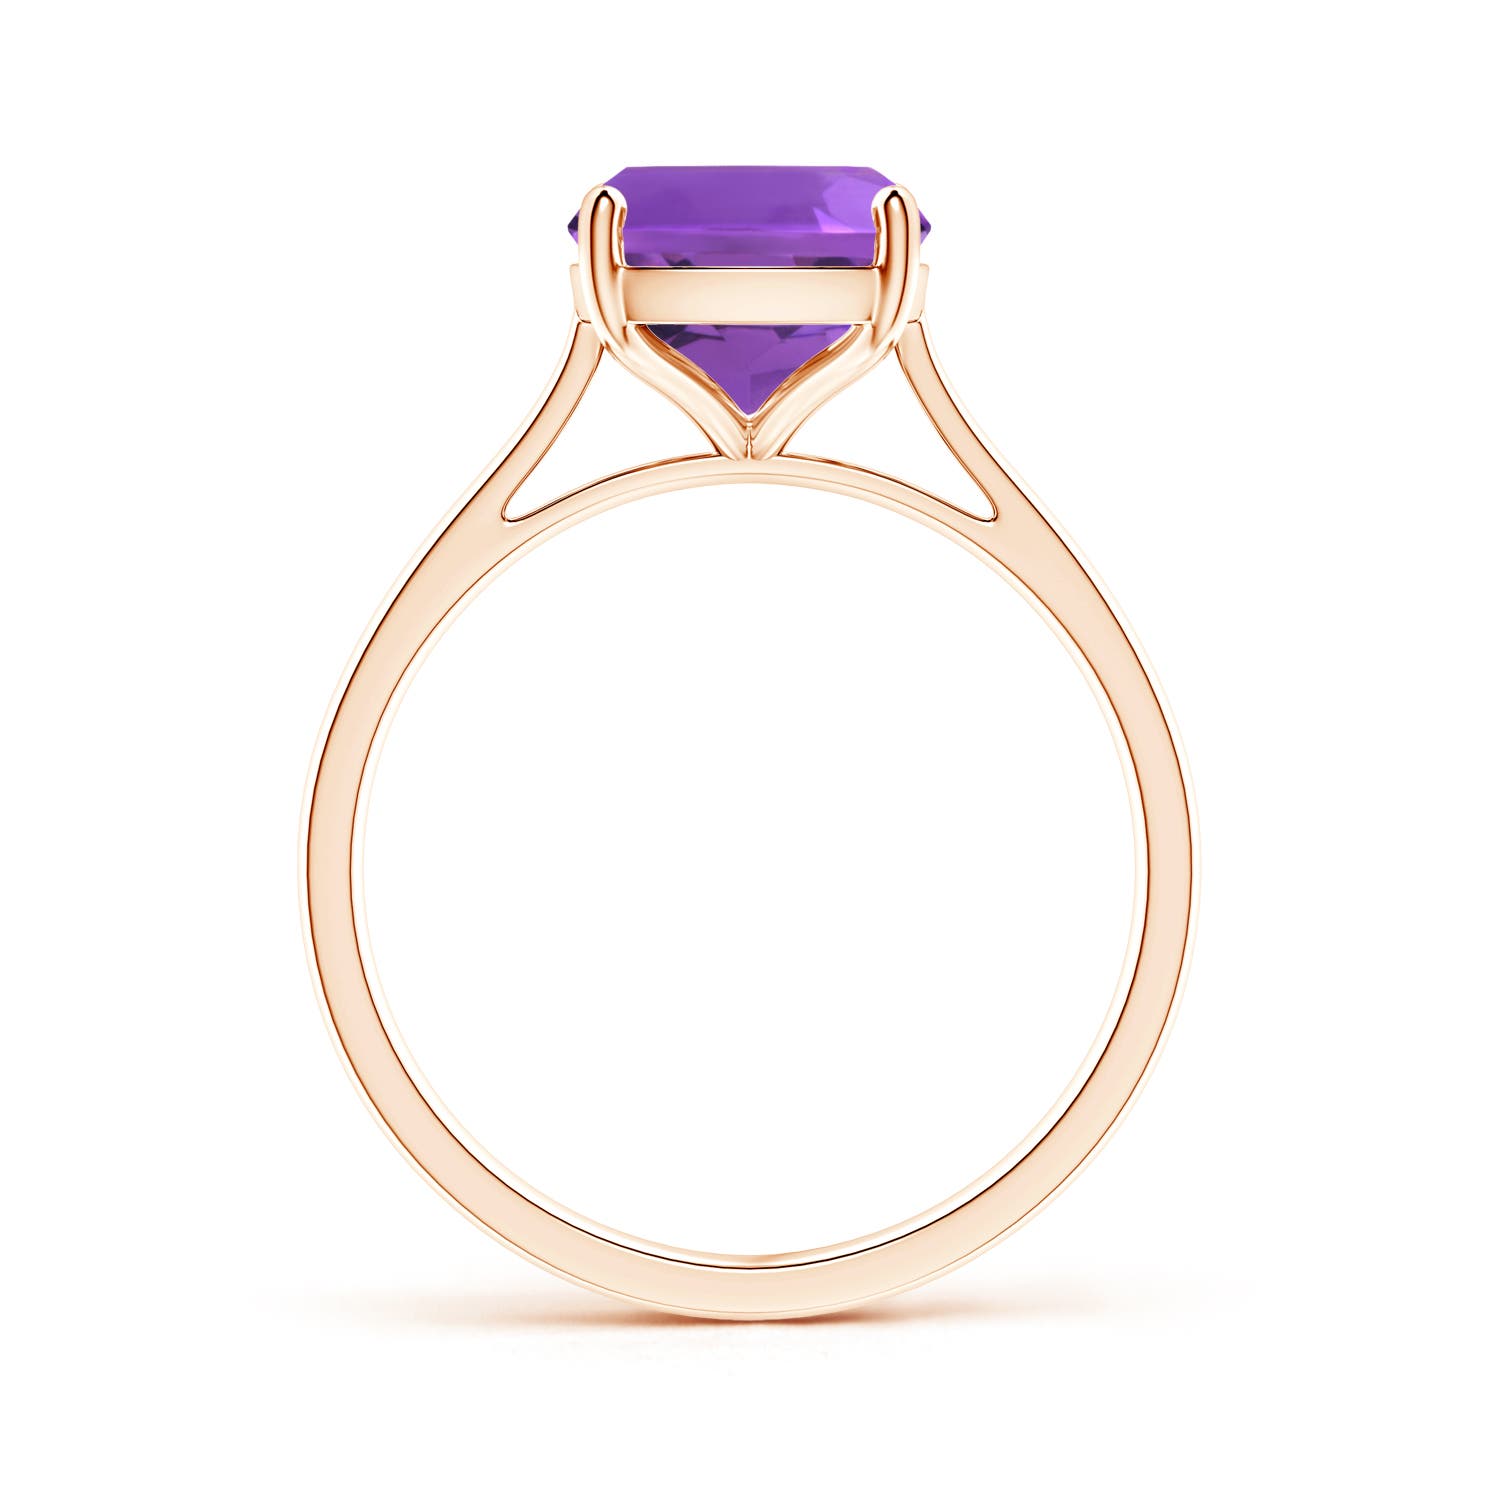 AAA - Amethyst / 2.7 CT / 14 KT Rose Gold